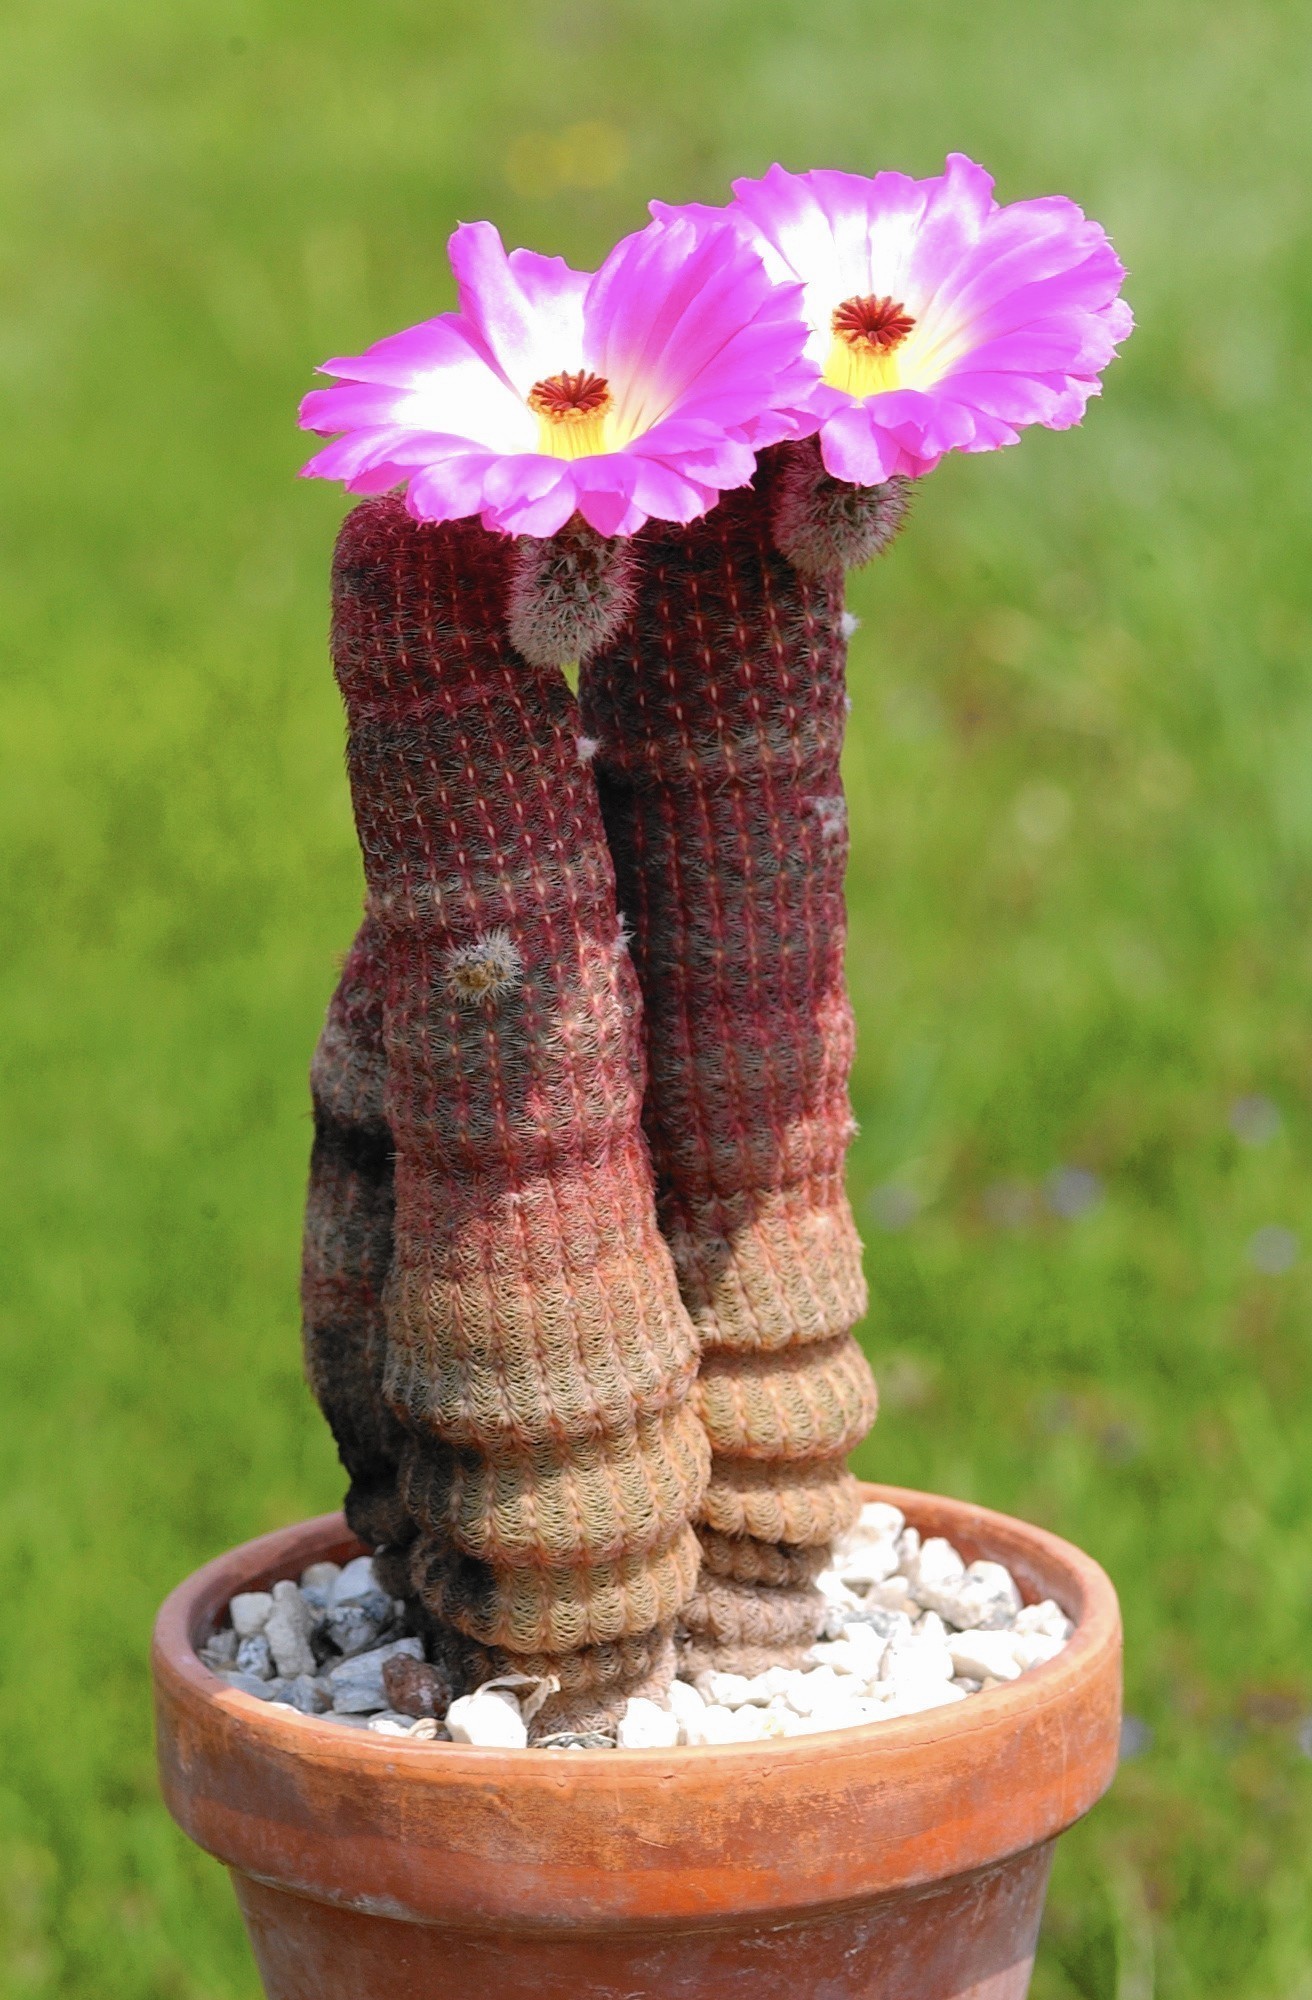 How can I get my cactus plant to bloom? - The Morning Call